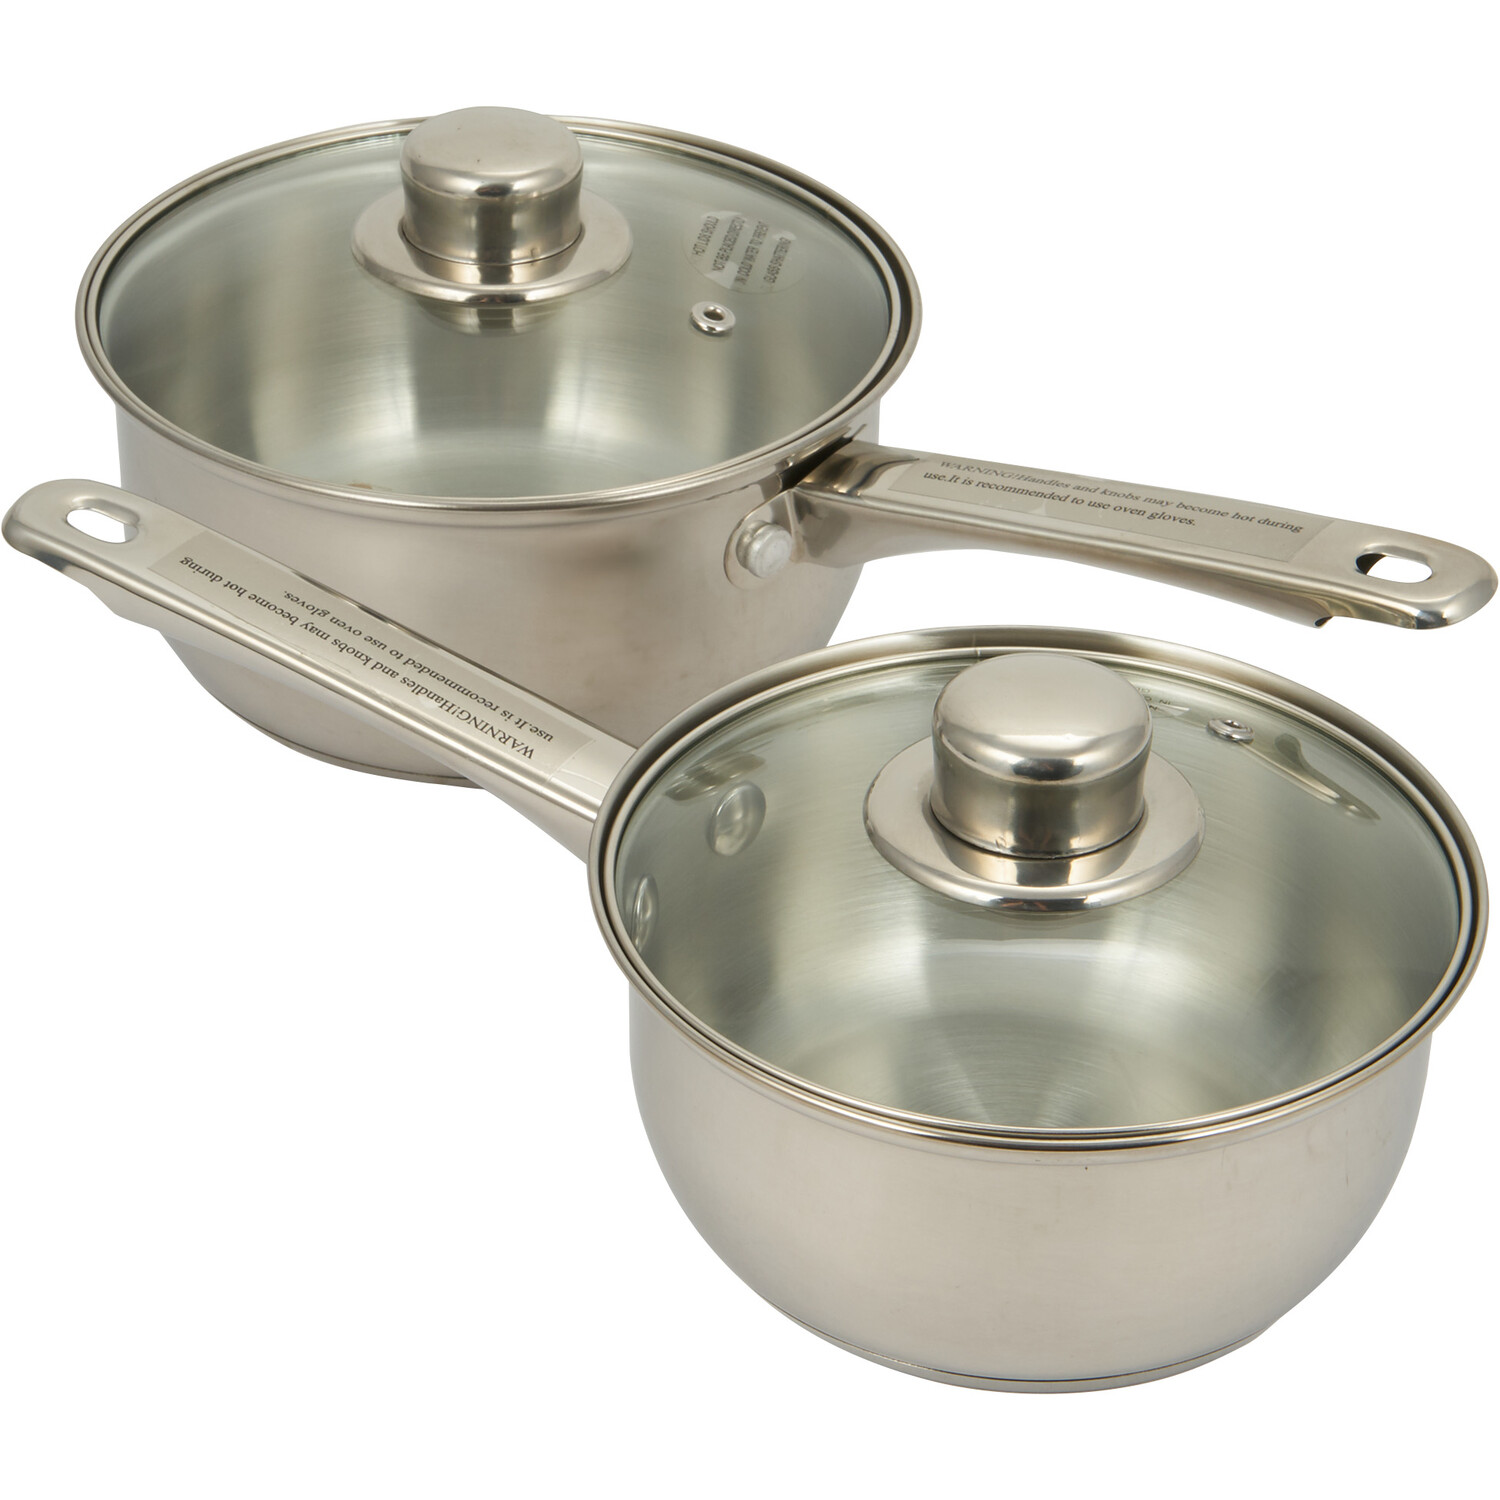 My Kitchen 3 Piece Stainless Steel Cookware Set - Chrome Image 3